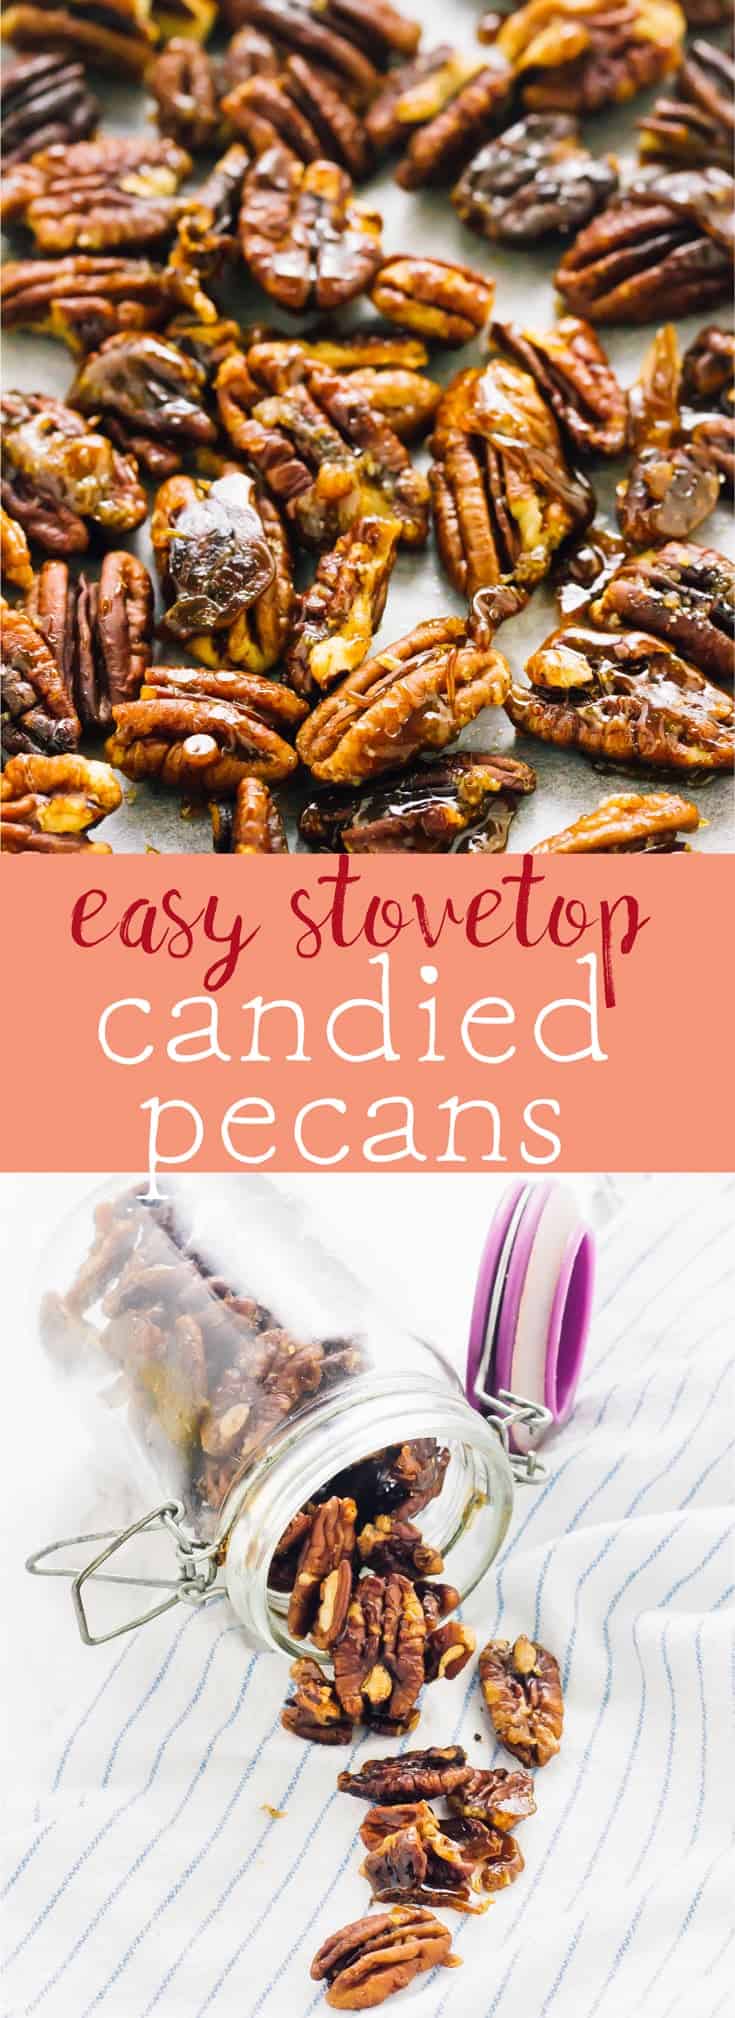 These Easy Stovetop Candied Pecans are deliciously crunchy, vegan, gluten free and paleo. They are perfect for topping everything from breakfasts to salads to desserts! via https://jessicainthekitchen.com